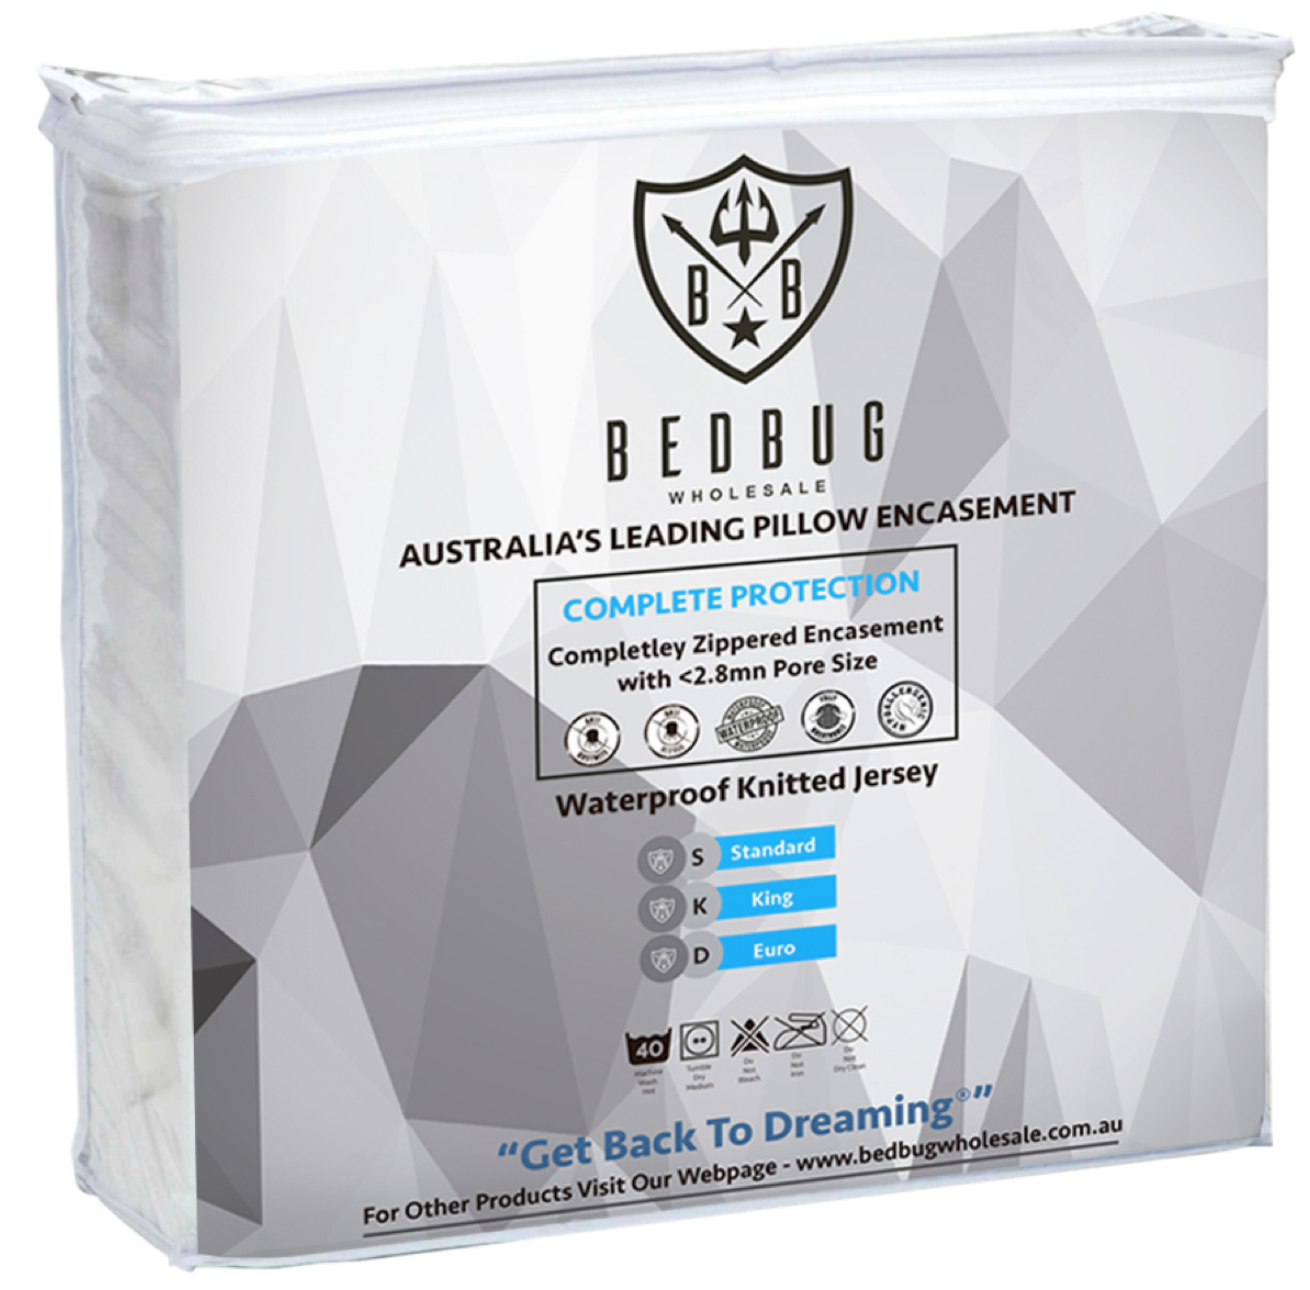 Allergy, Dust Mite & Bed Bug Pillow Protector